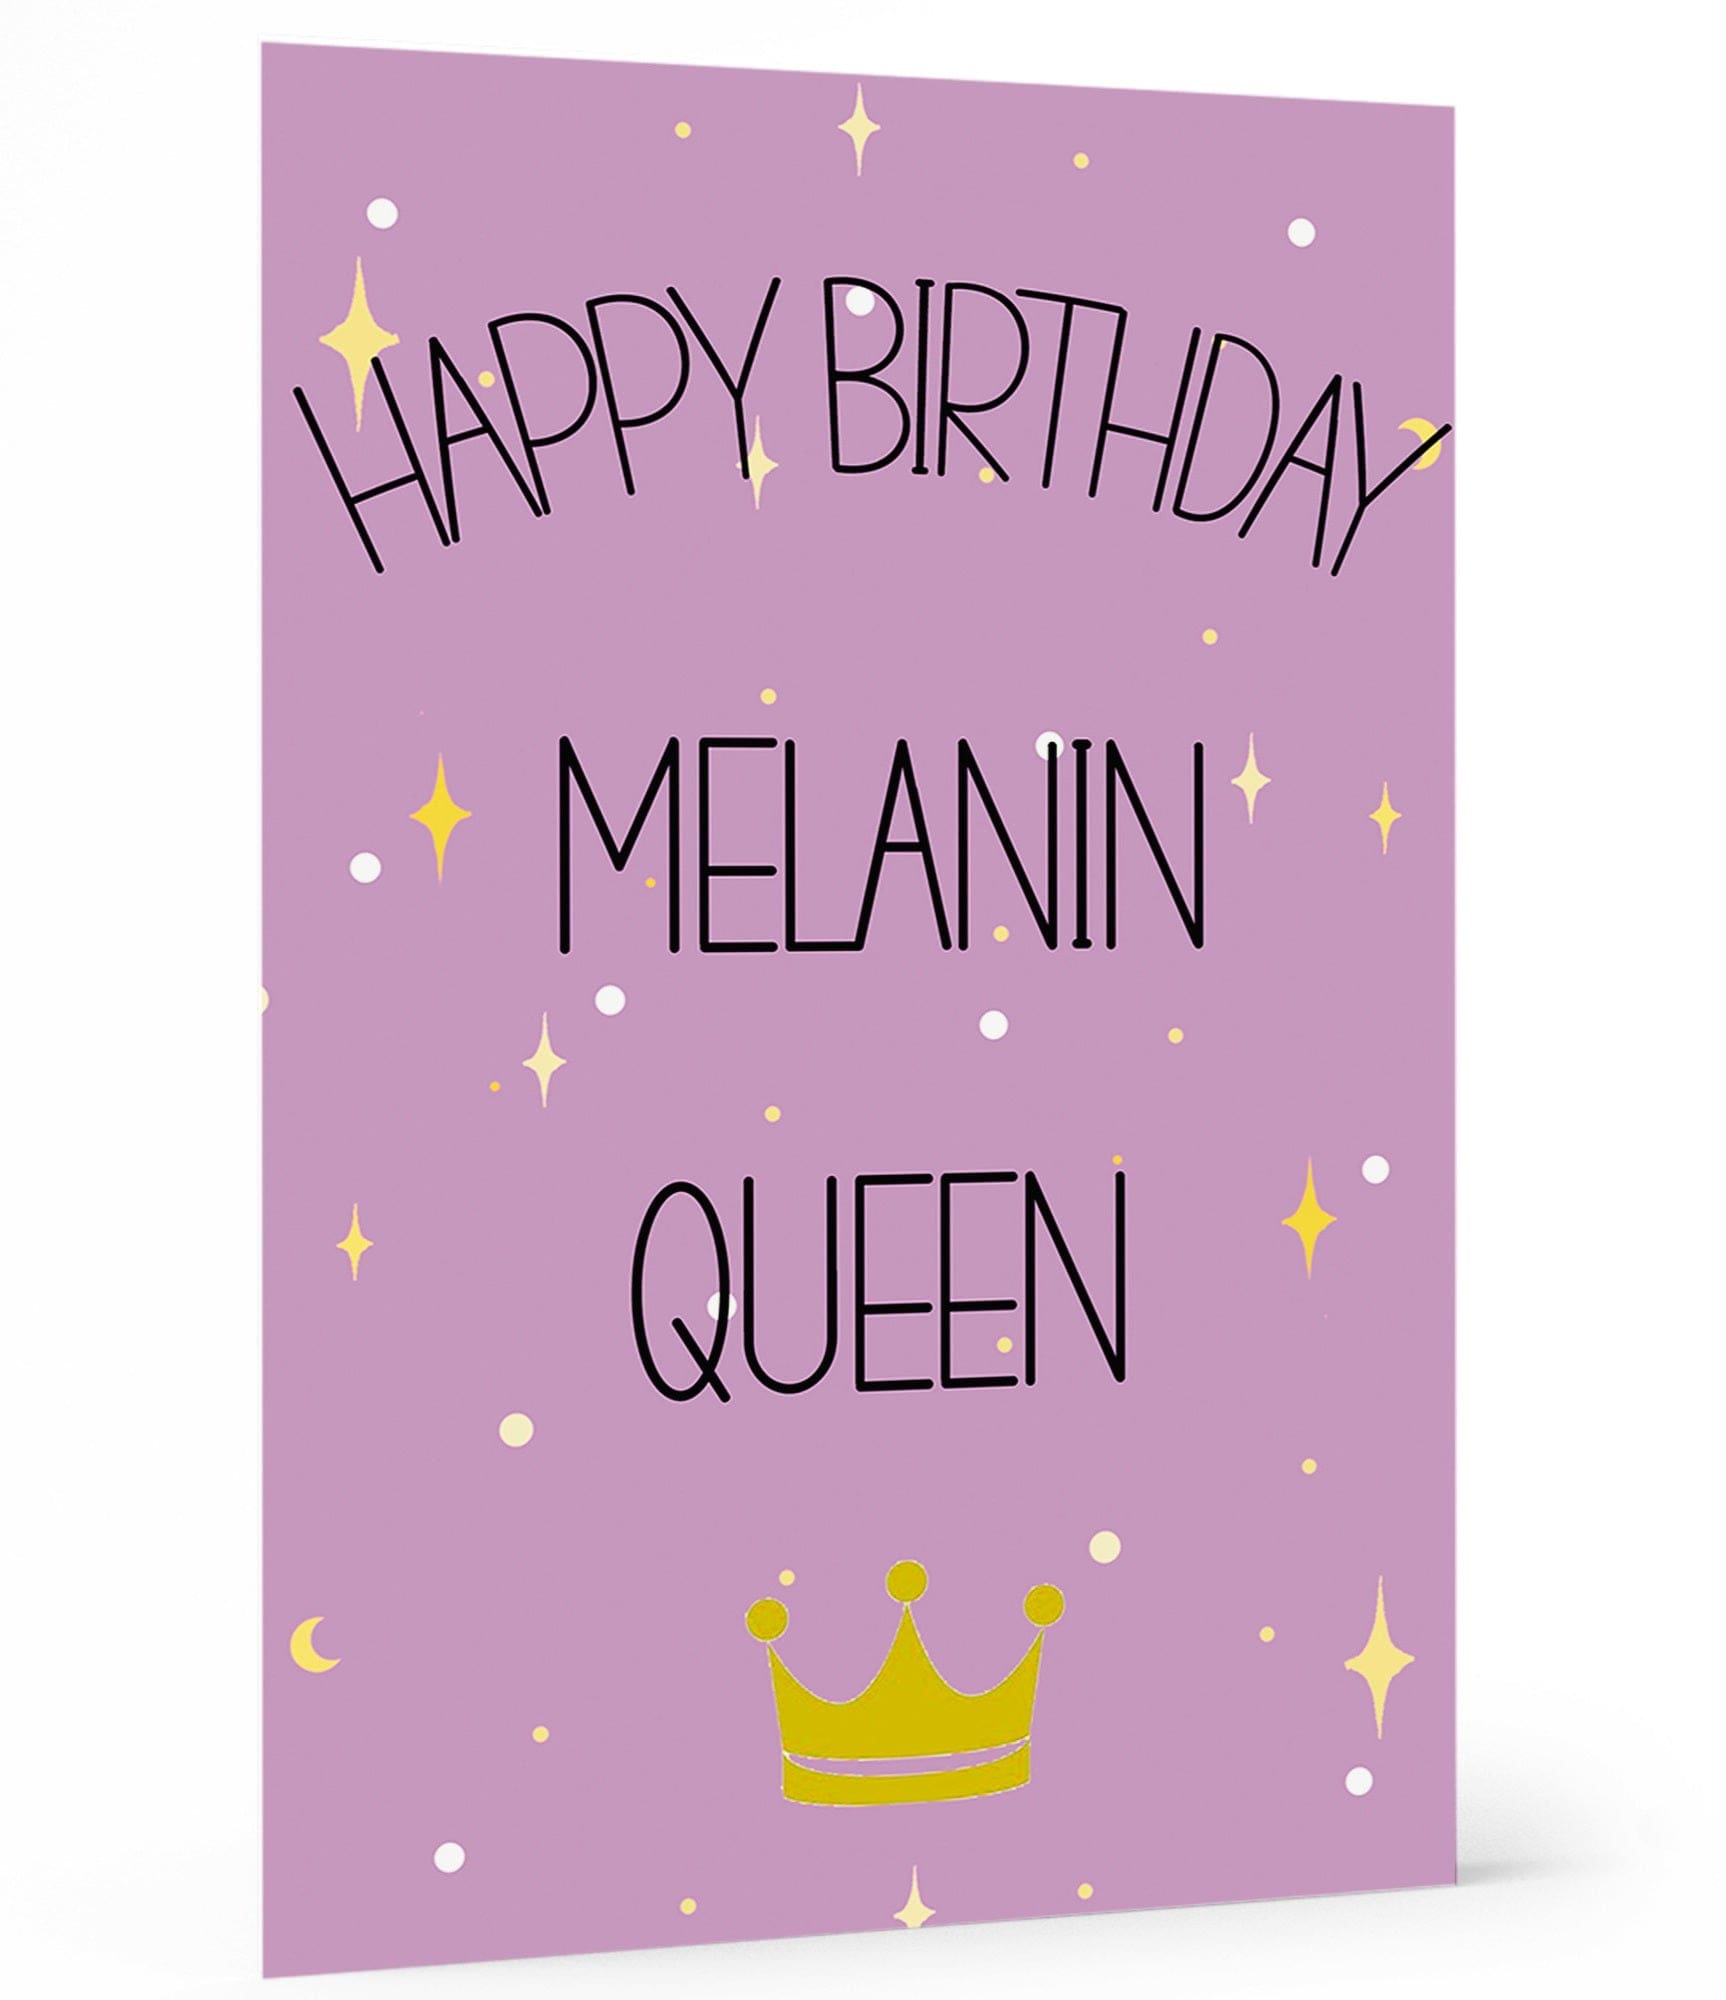 Melanin Queen Card, wakuda, african print fans, black-owned brands, black pound day